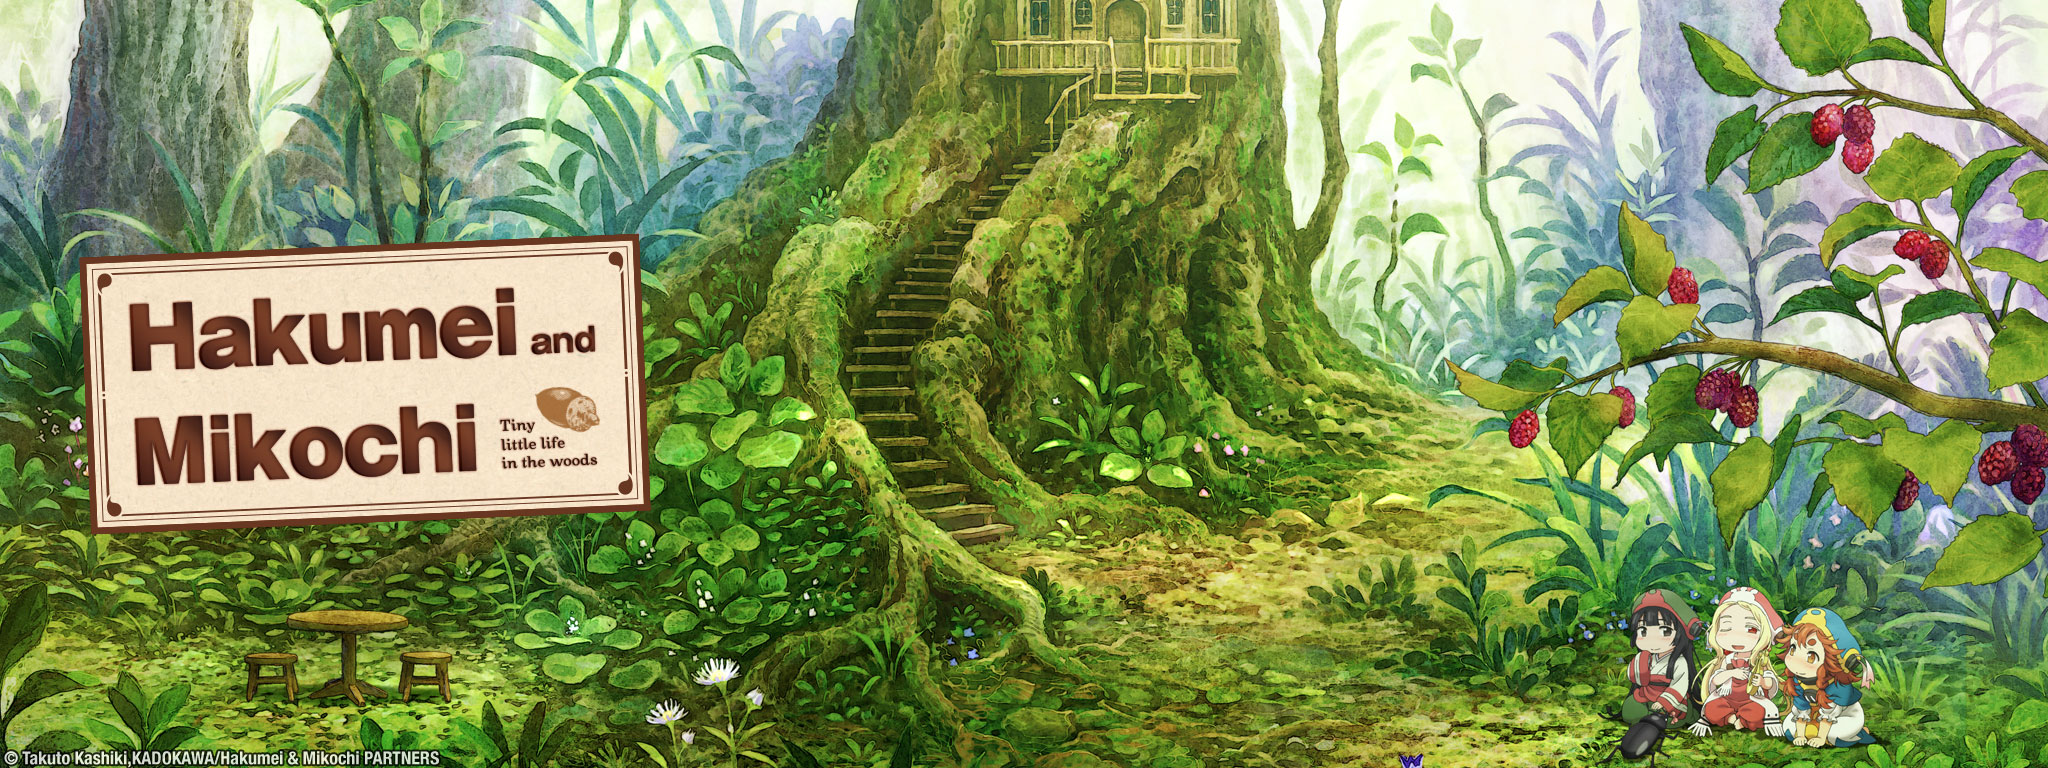 Title Art for Hakumei and Mikochi